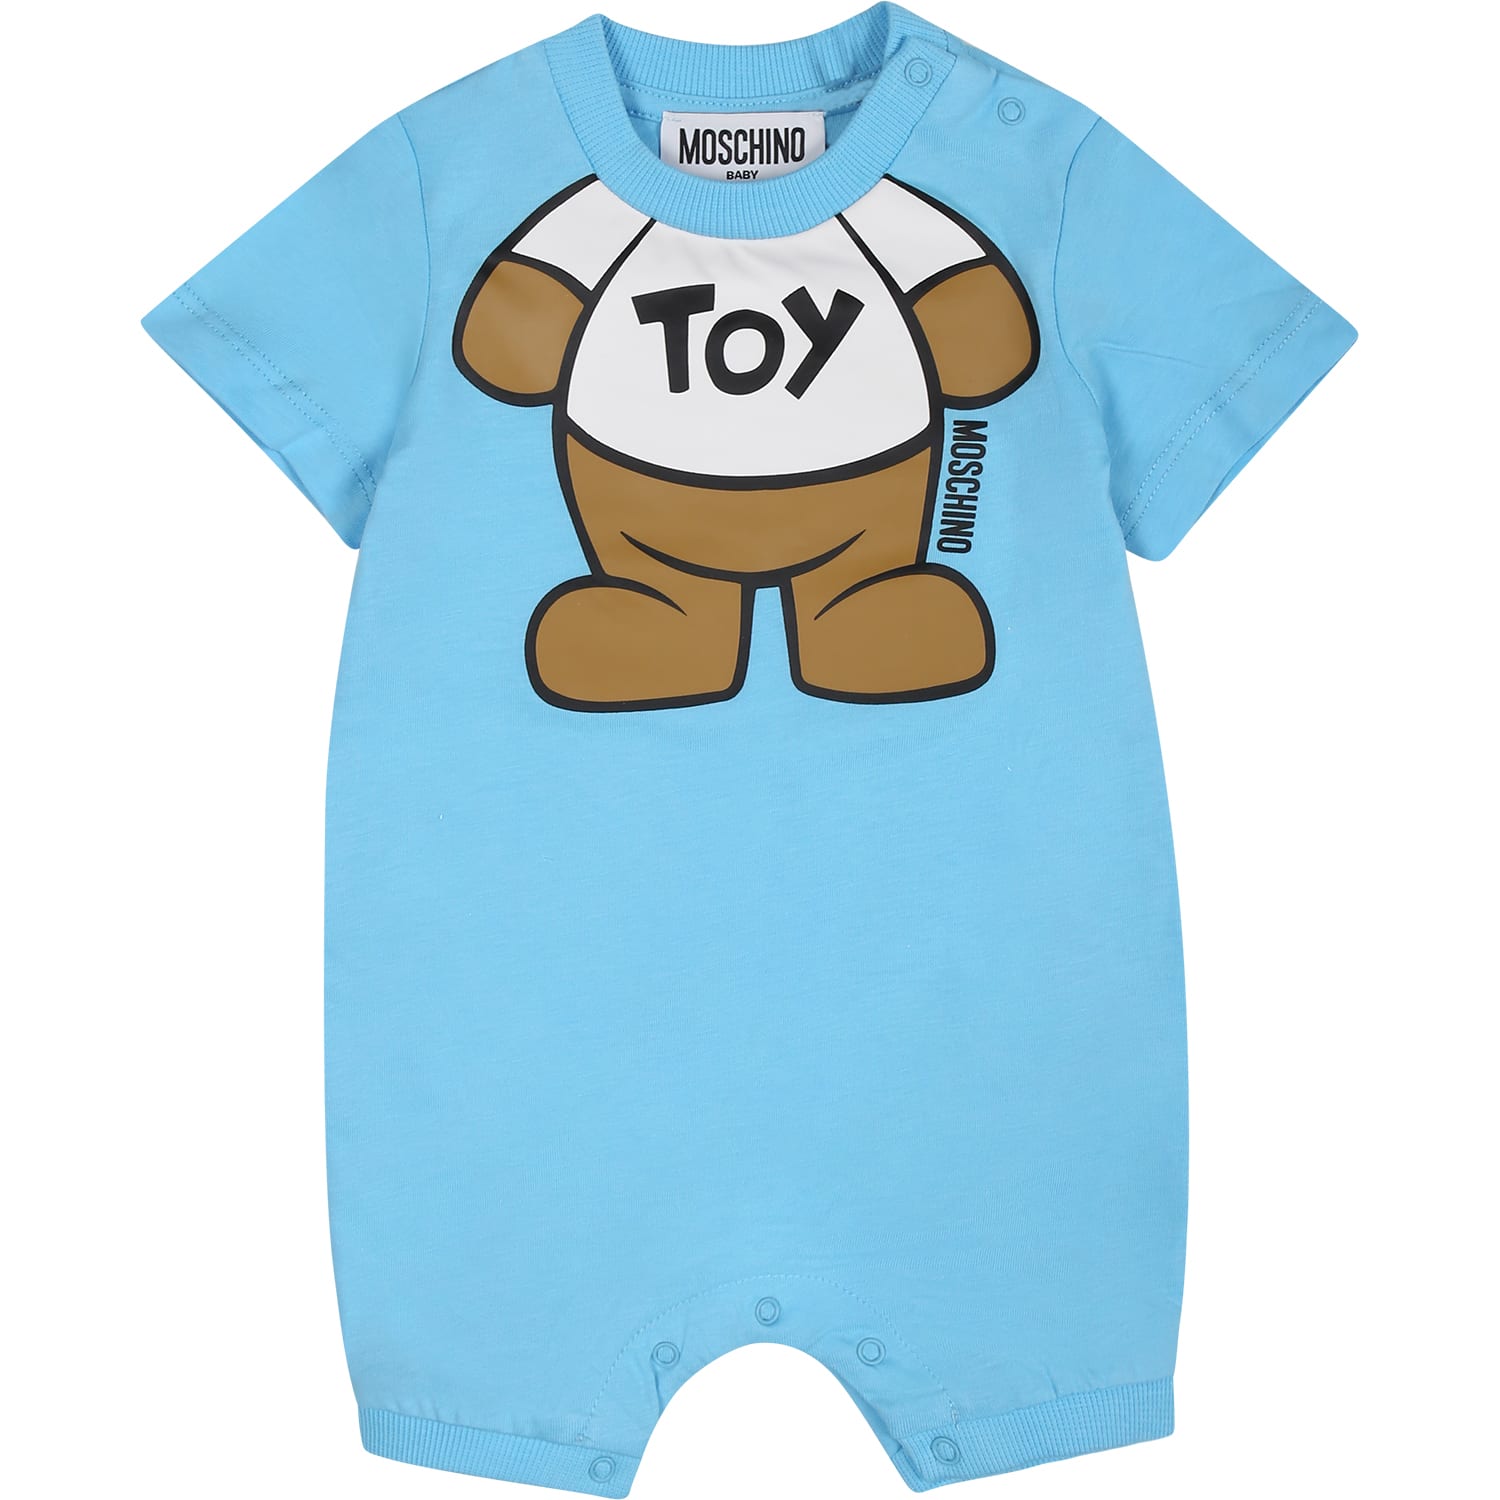 Moschino Light Blue Romper For Baby Boy With Teddy Bear